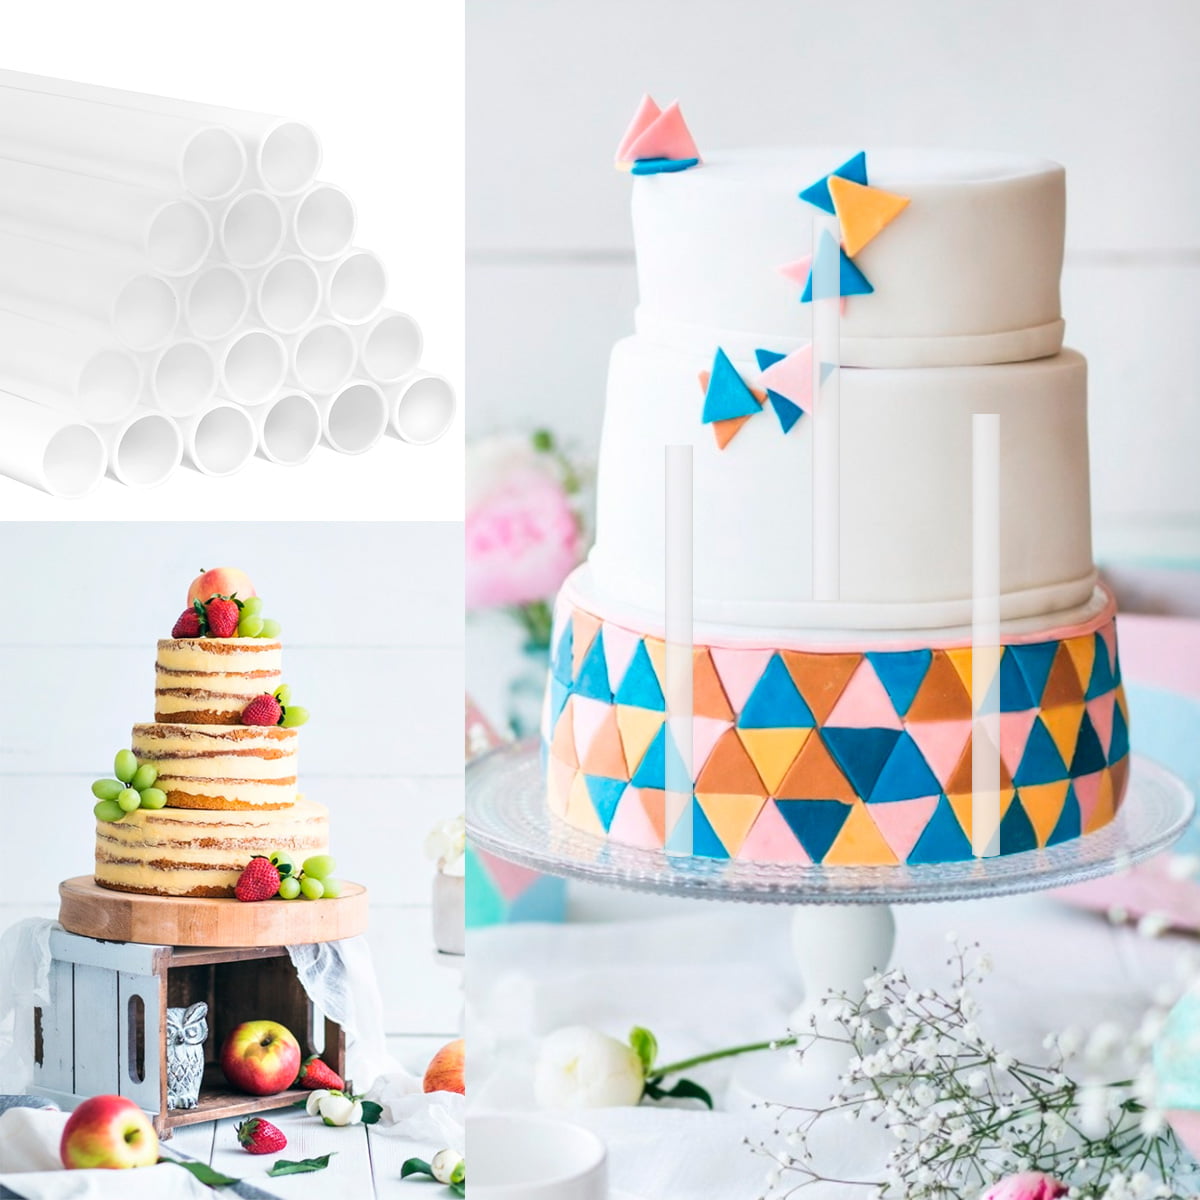 2/3 Layers Cake Dowels White Small Disc Stand For Cake Decorating